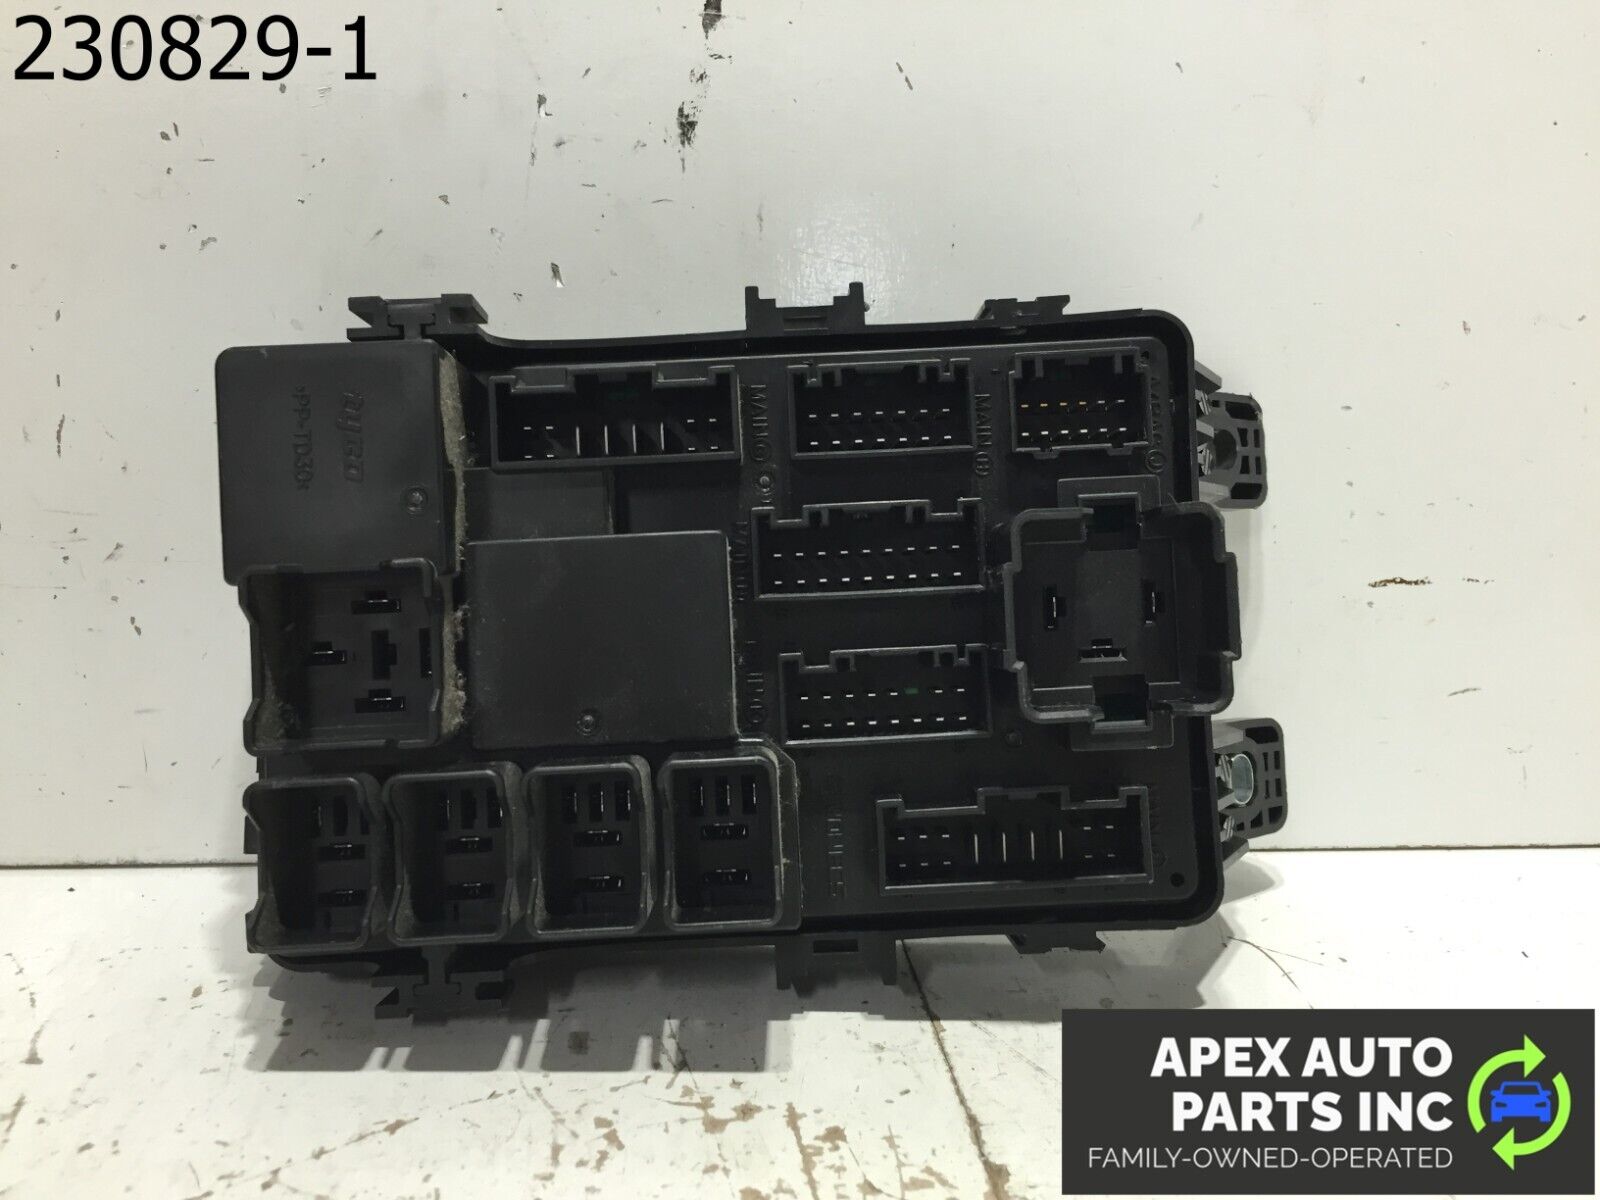 OEM 06-11 Hyundai ACCENT Fuse Box Engine Compartment Fits  337046